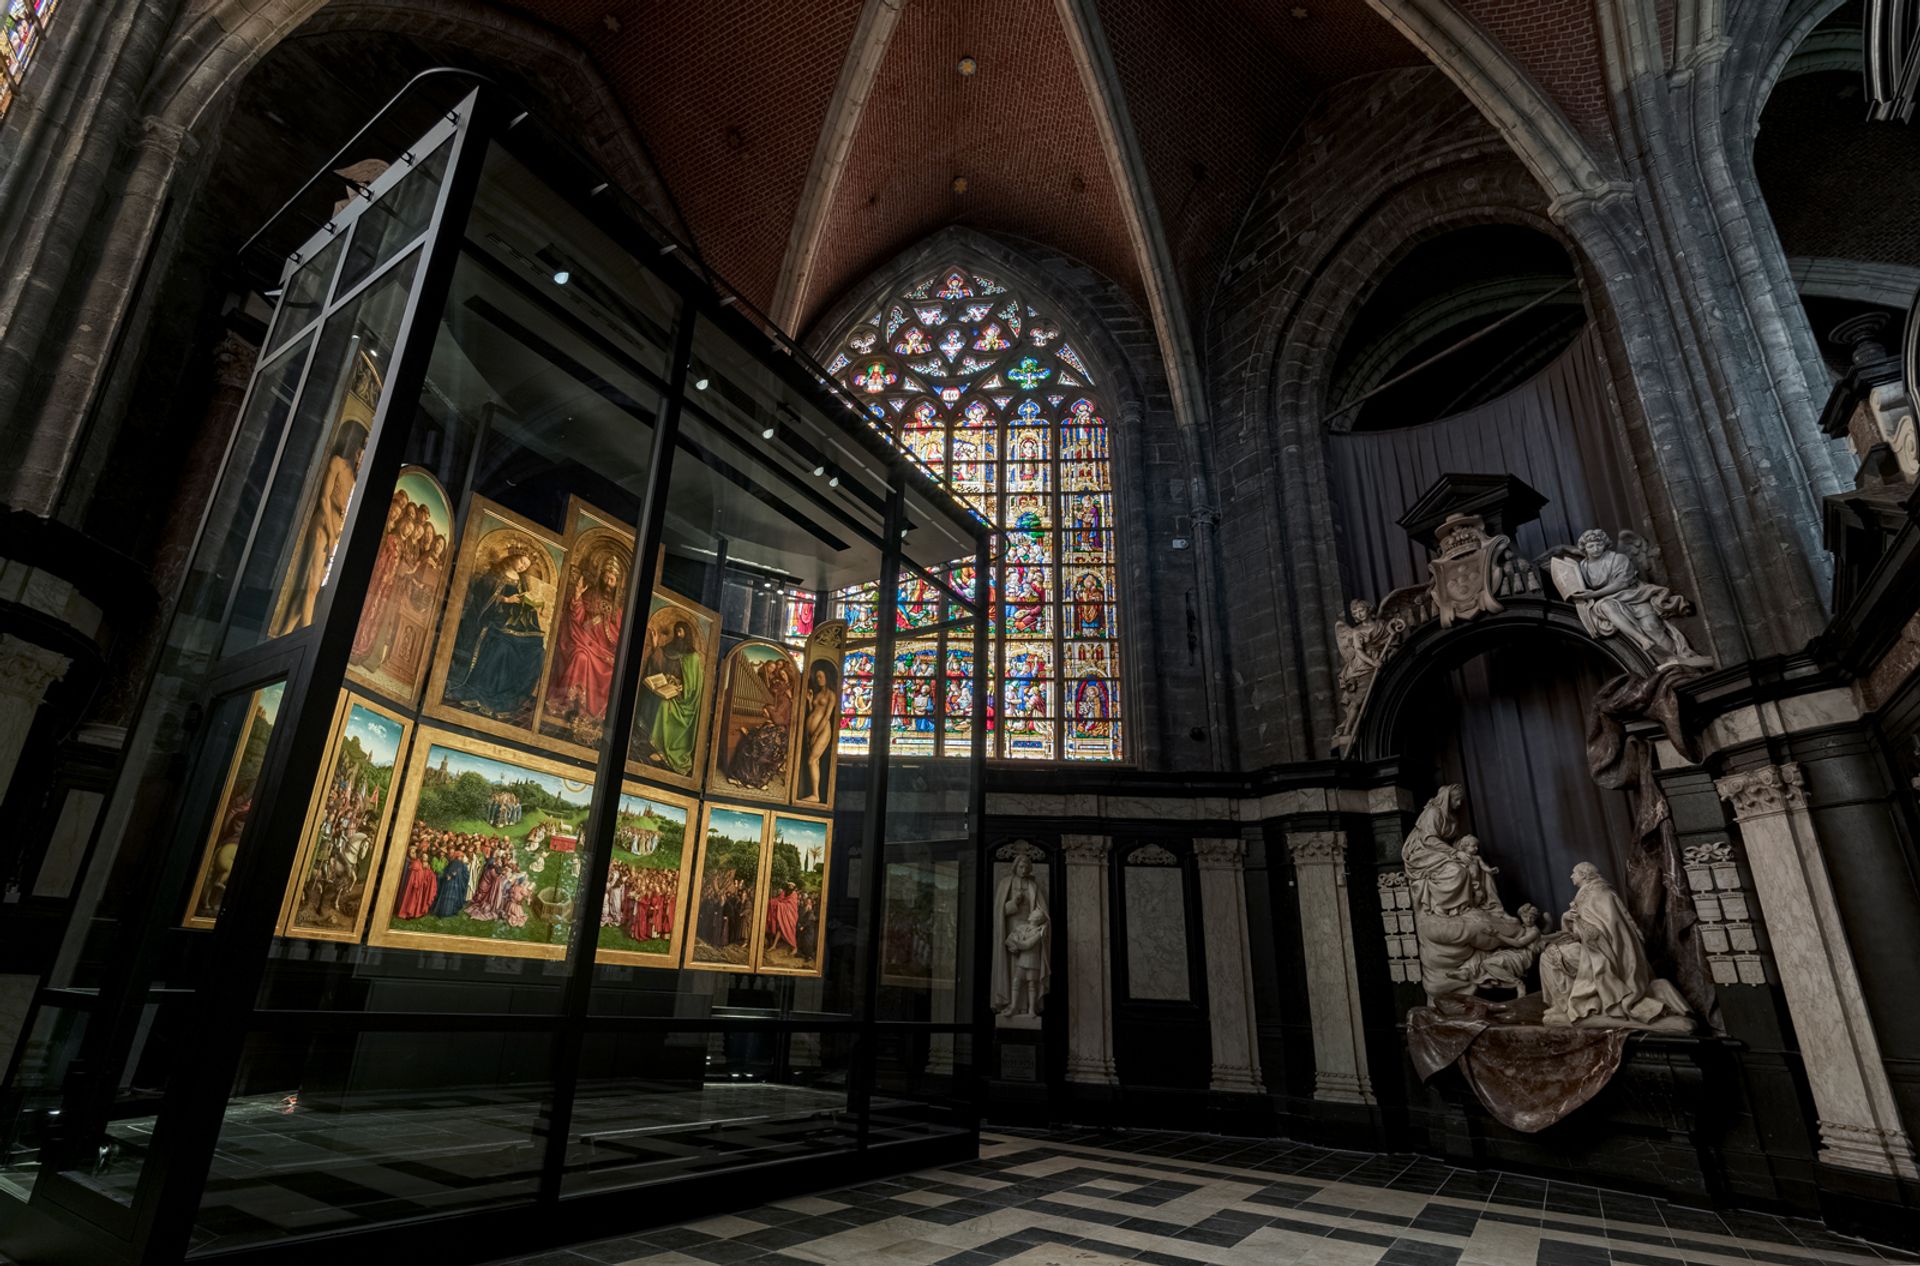 The Ghent Altarpiece will be open during the day Photo: © Cedric Verhelst